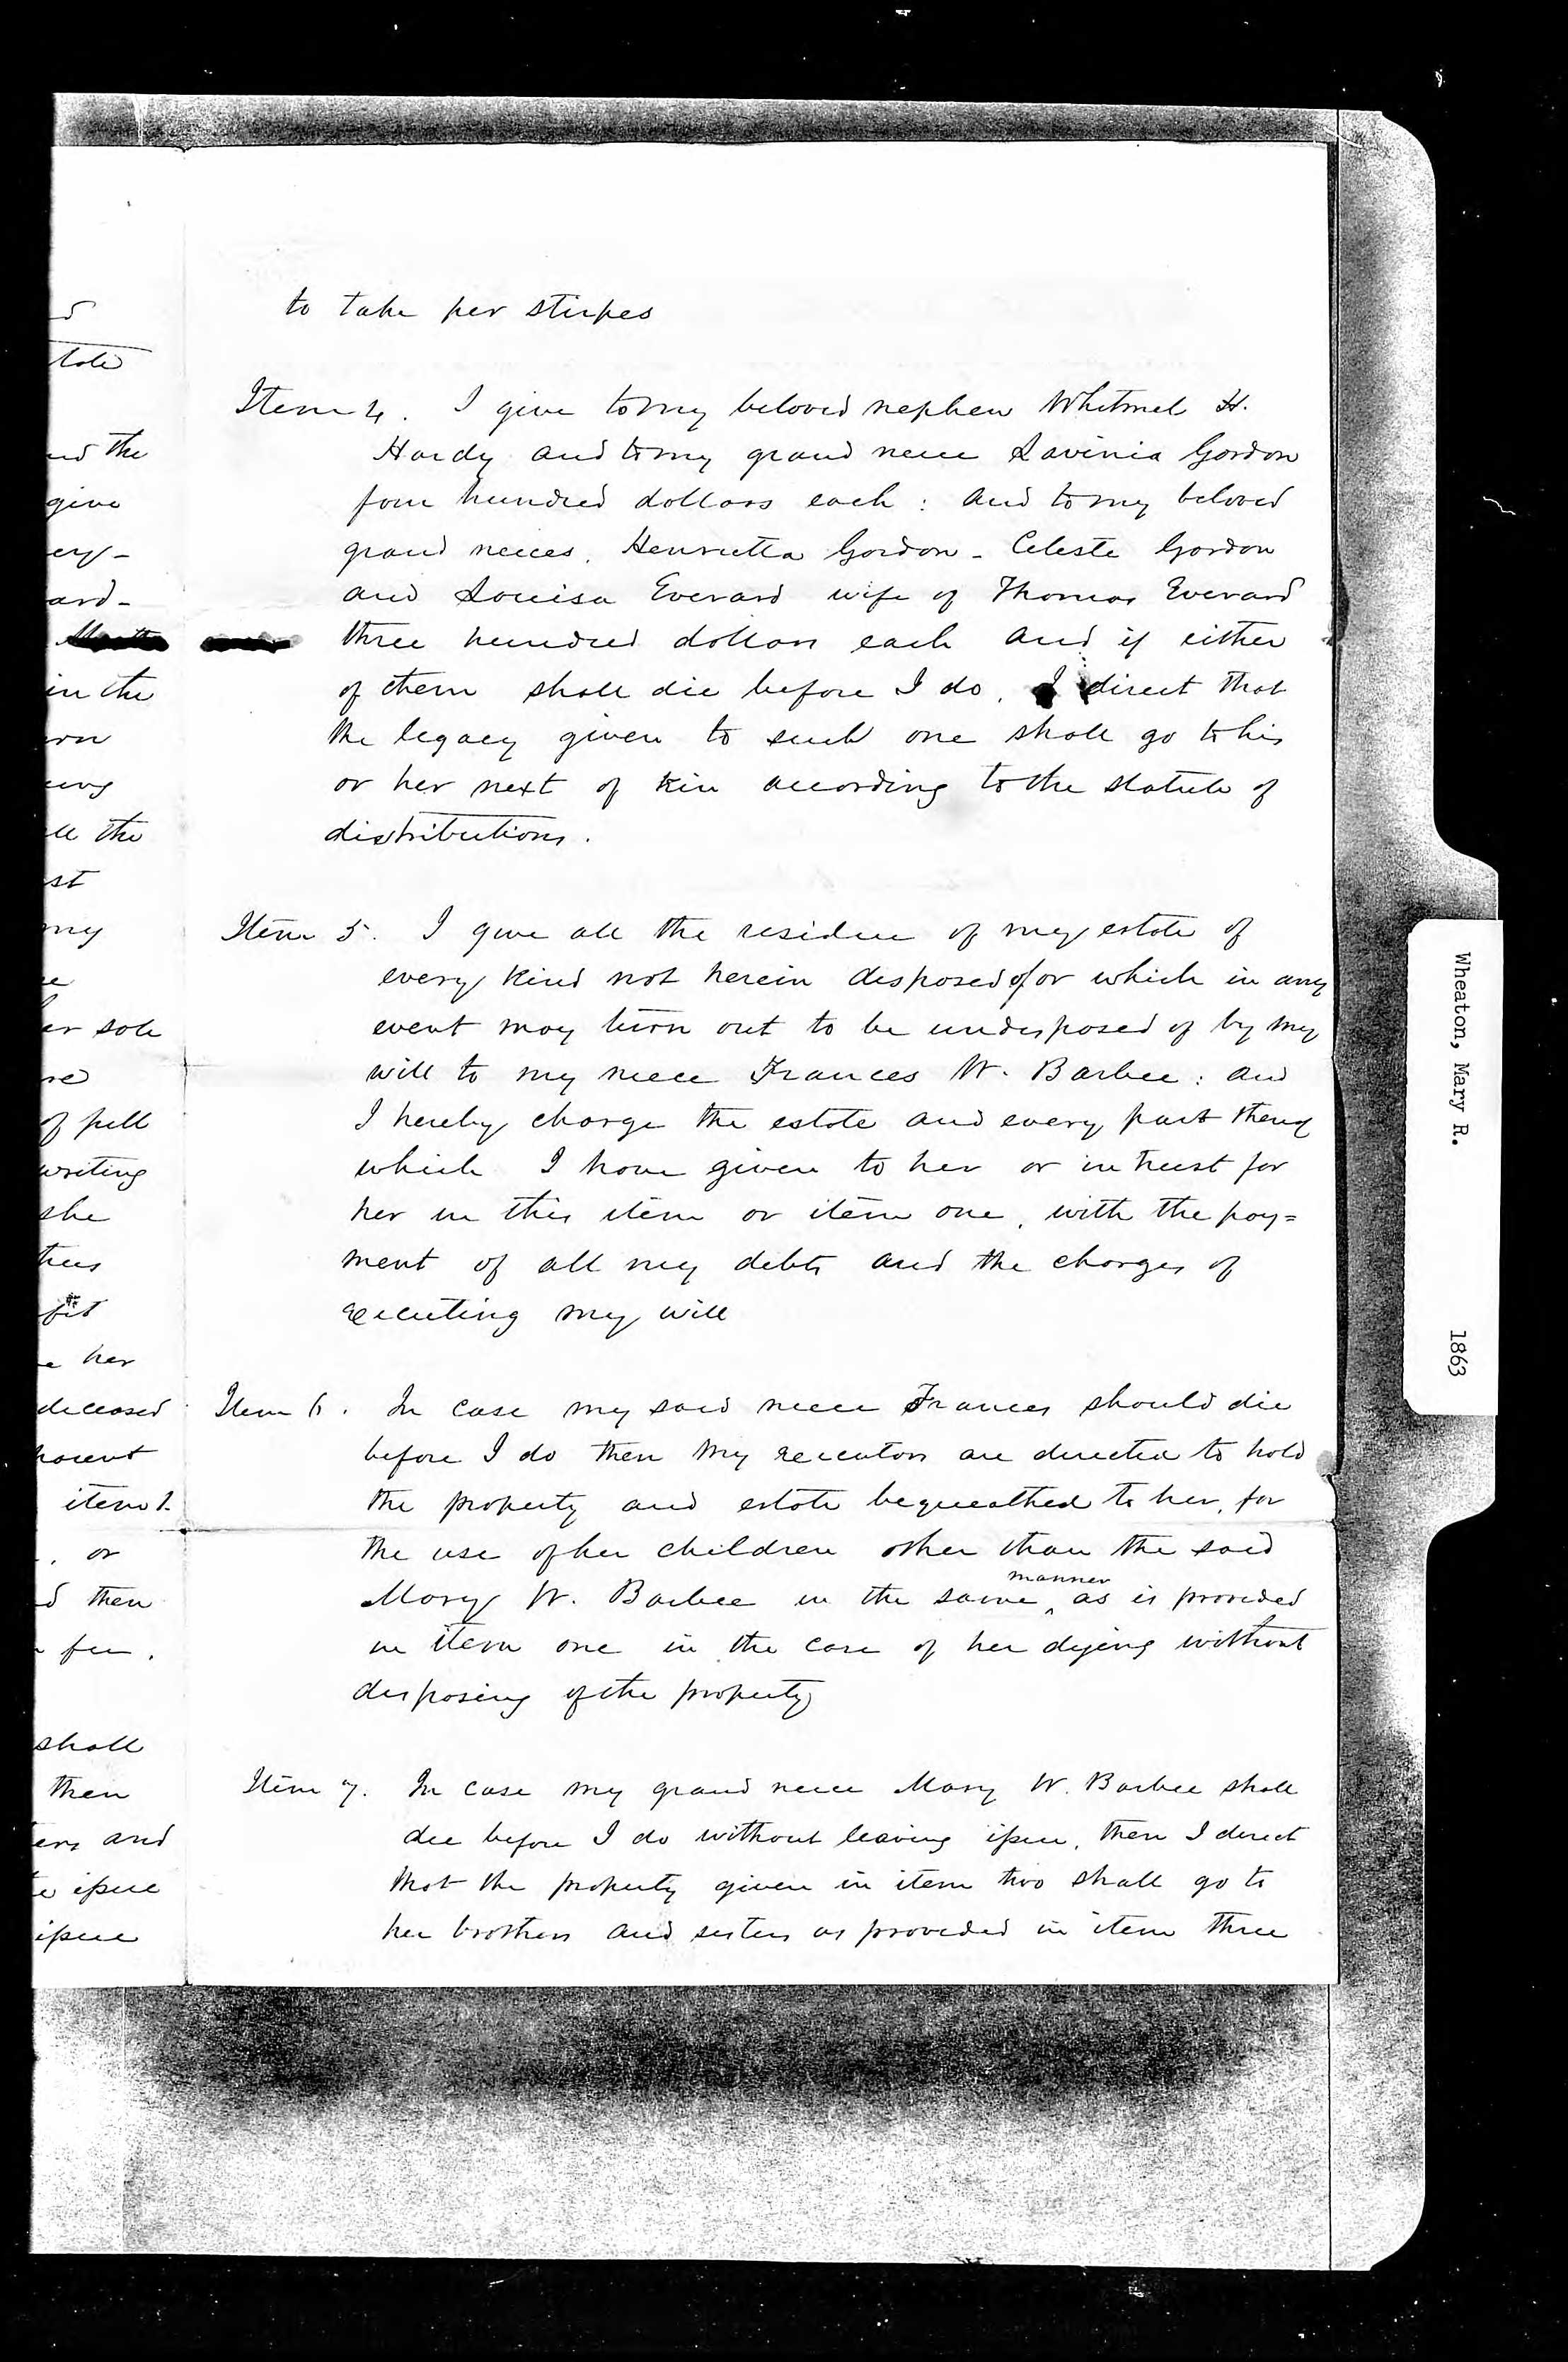 Will of Mary R. Wheaton, November 9, 1858, page 3